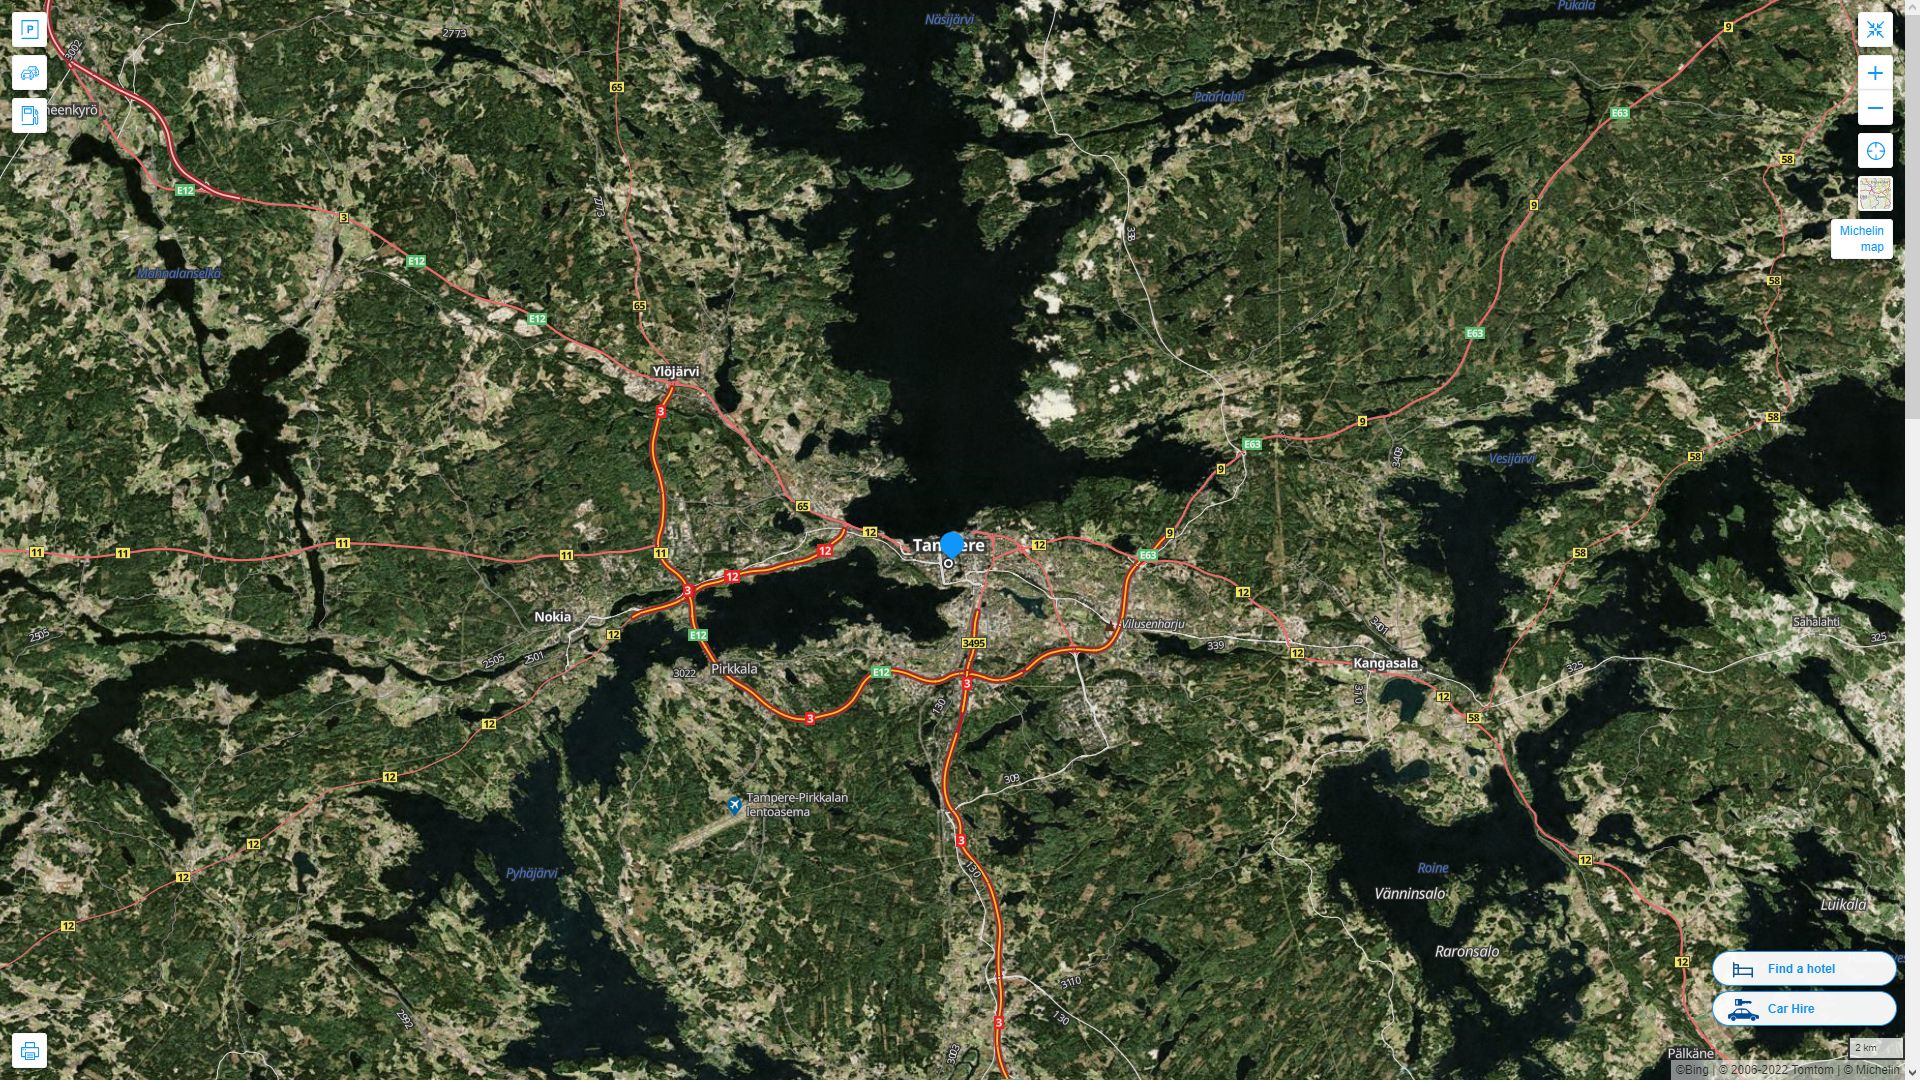 Tampere Highway and Road Map with Satellite View